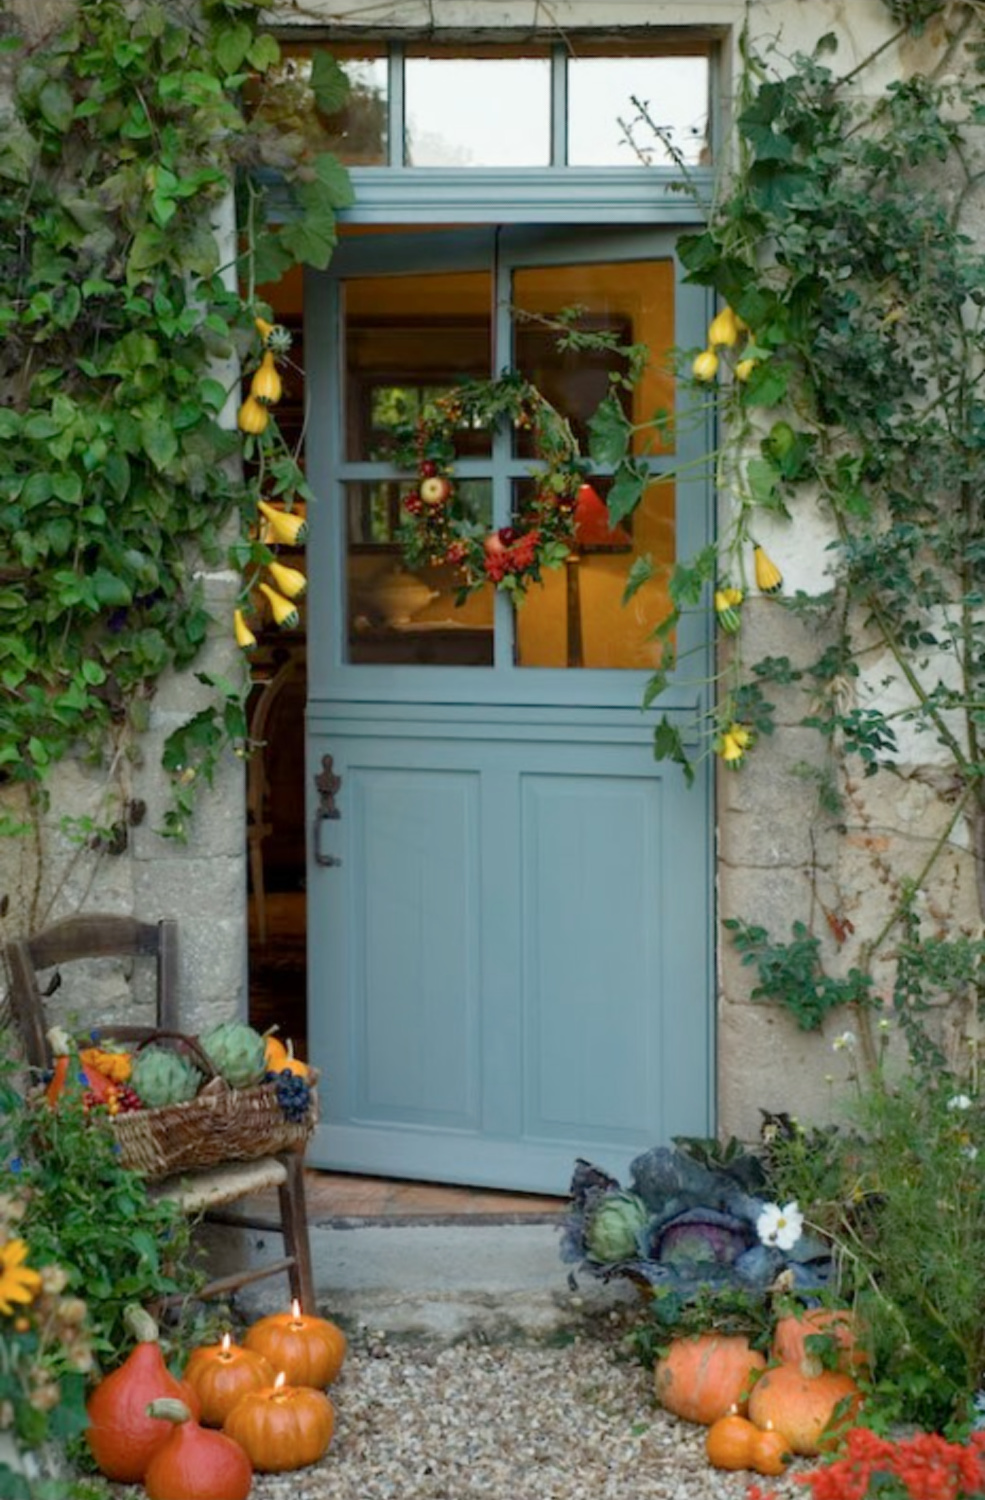 Charming blue French door with wreath as well as pumpkins and candlelight - Le Moulin Bregeon. #frenchcountryfalldecor #fallwreaths #frenchfarmhouse